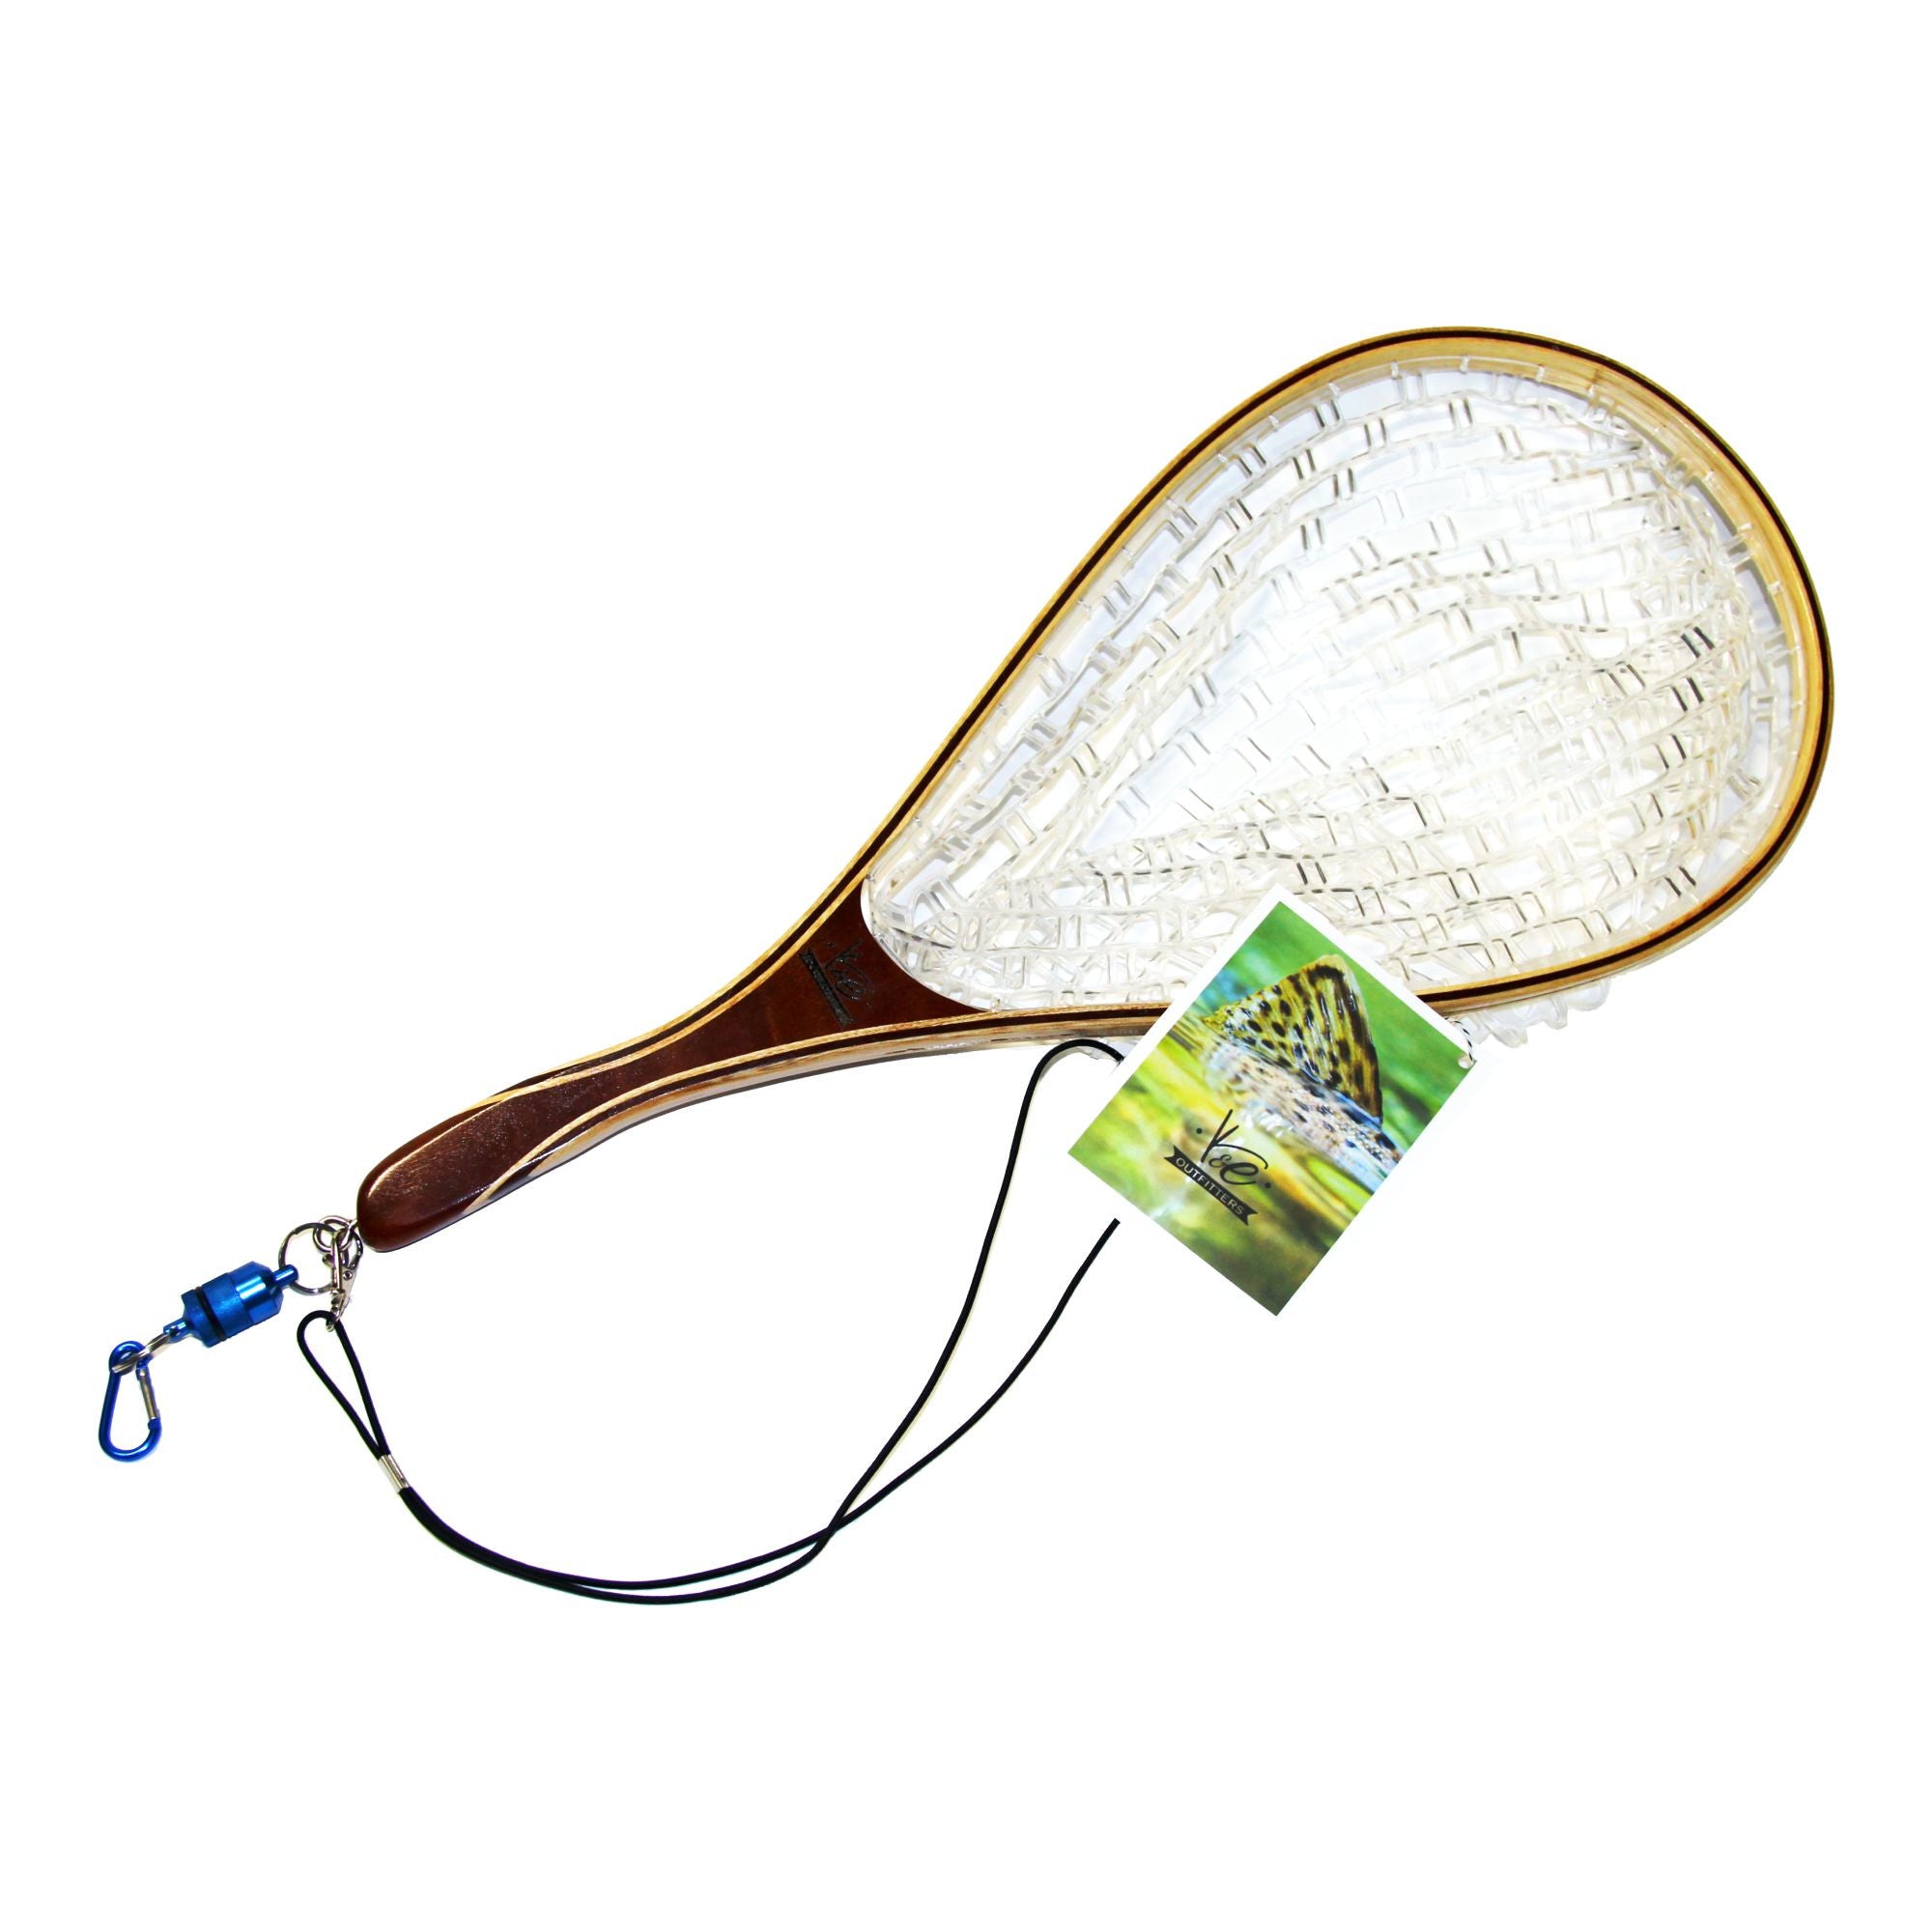 Maxcatch Fly Fishing Landing Net Trout Wooden Frame Soft Rubber Netting with Magnet Release